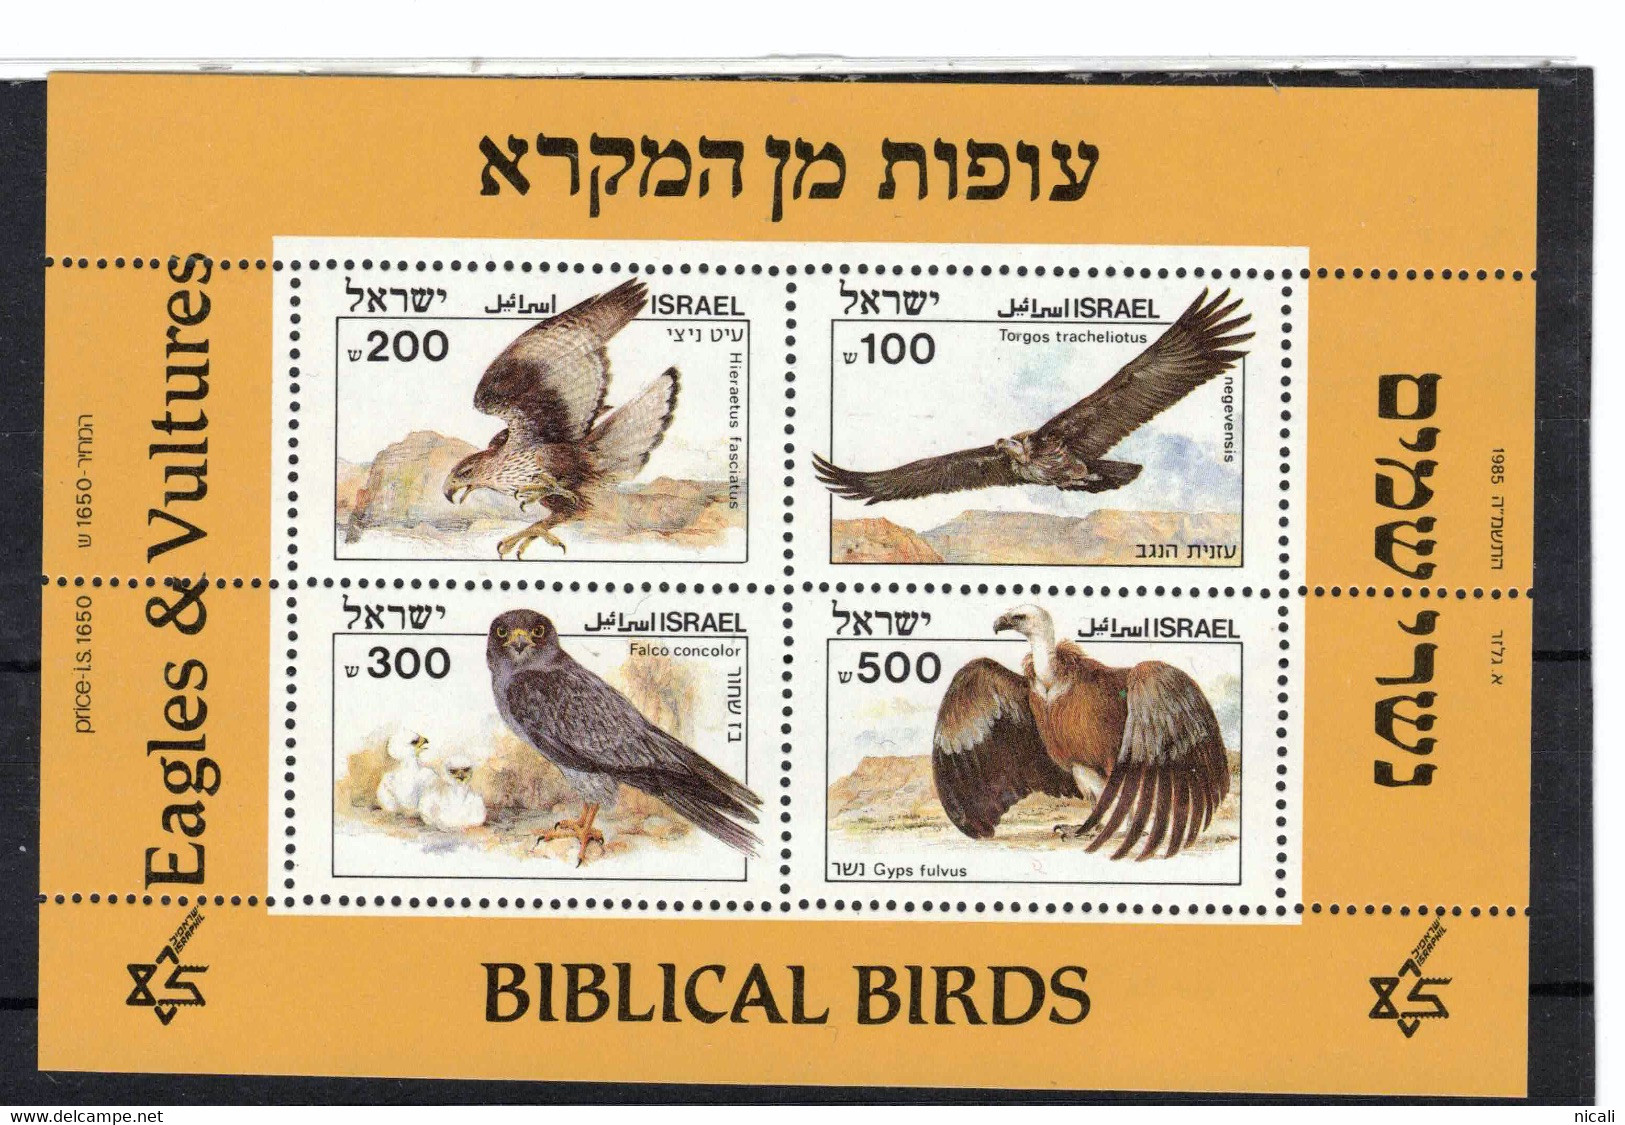 ISRAEL 1985 Biblical Birds SG MS948 UNHM #APJ12 - Unused Stamps (without Tabs)